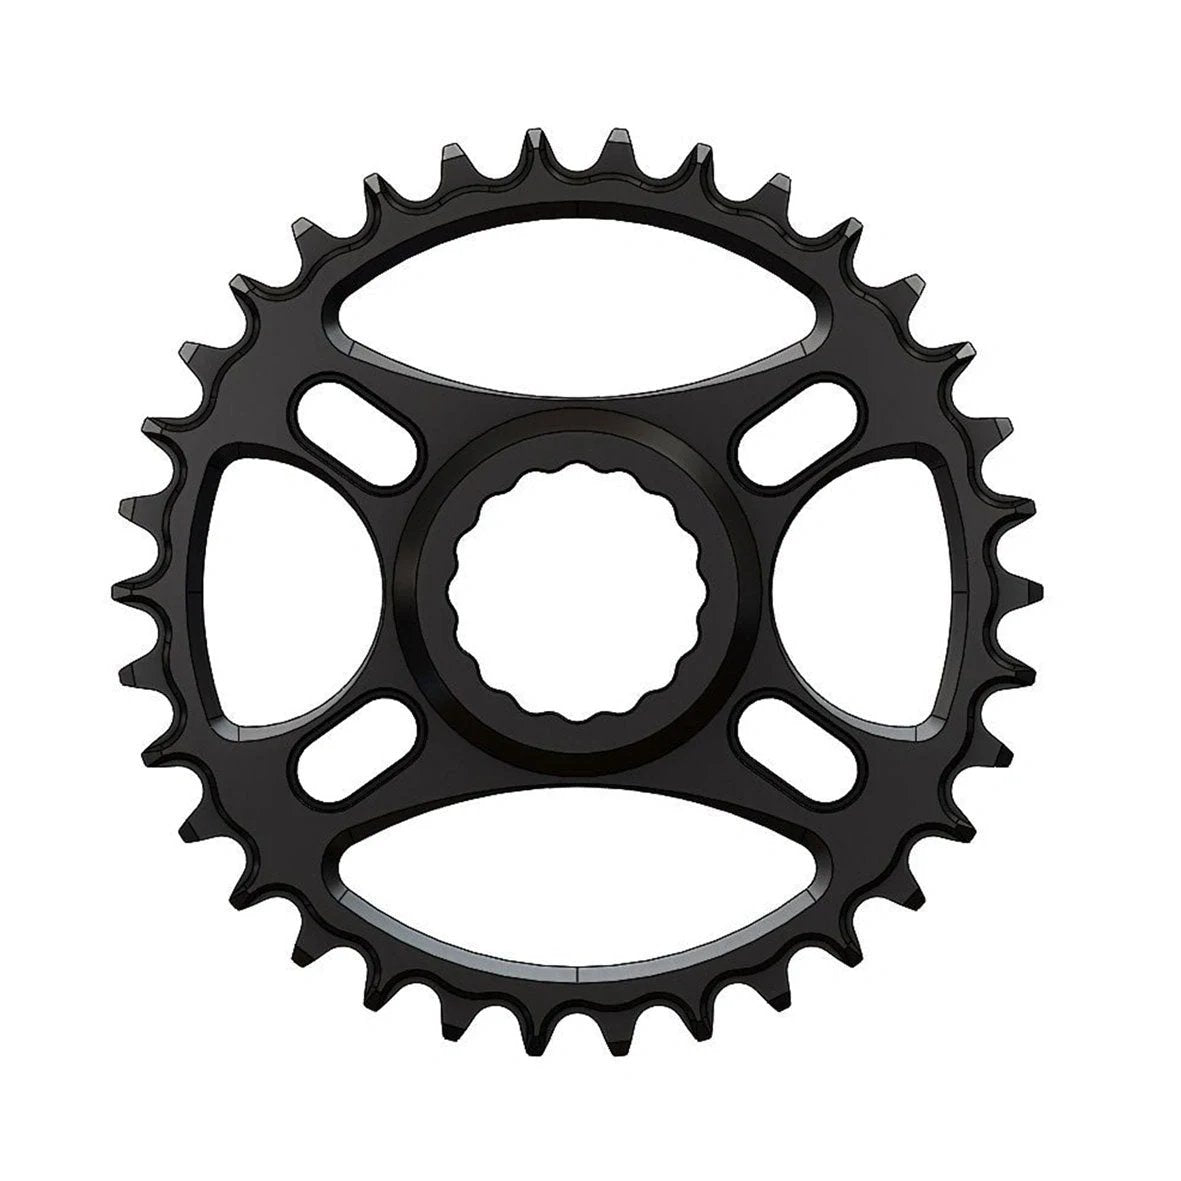 Pilo 34T Race Hg+ Chainring For Cranks - High Performance Upgrade